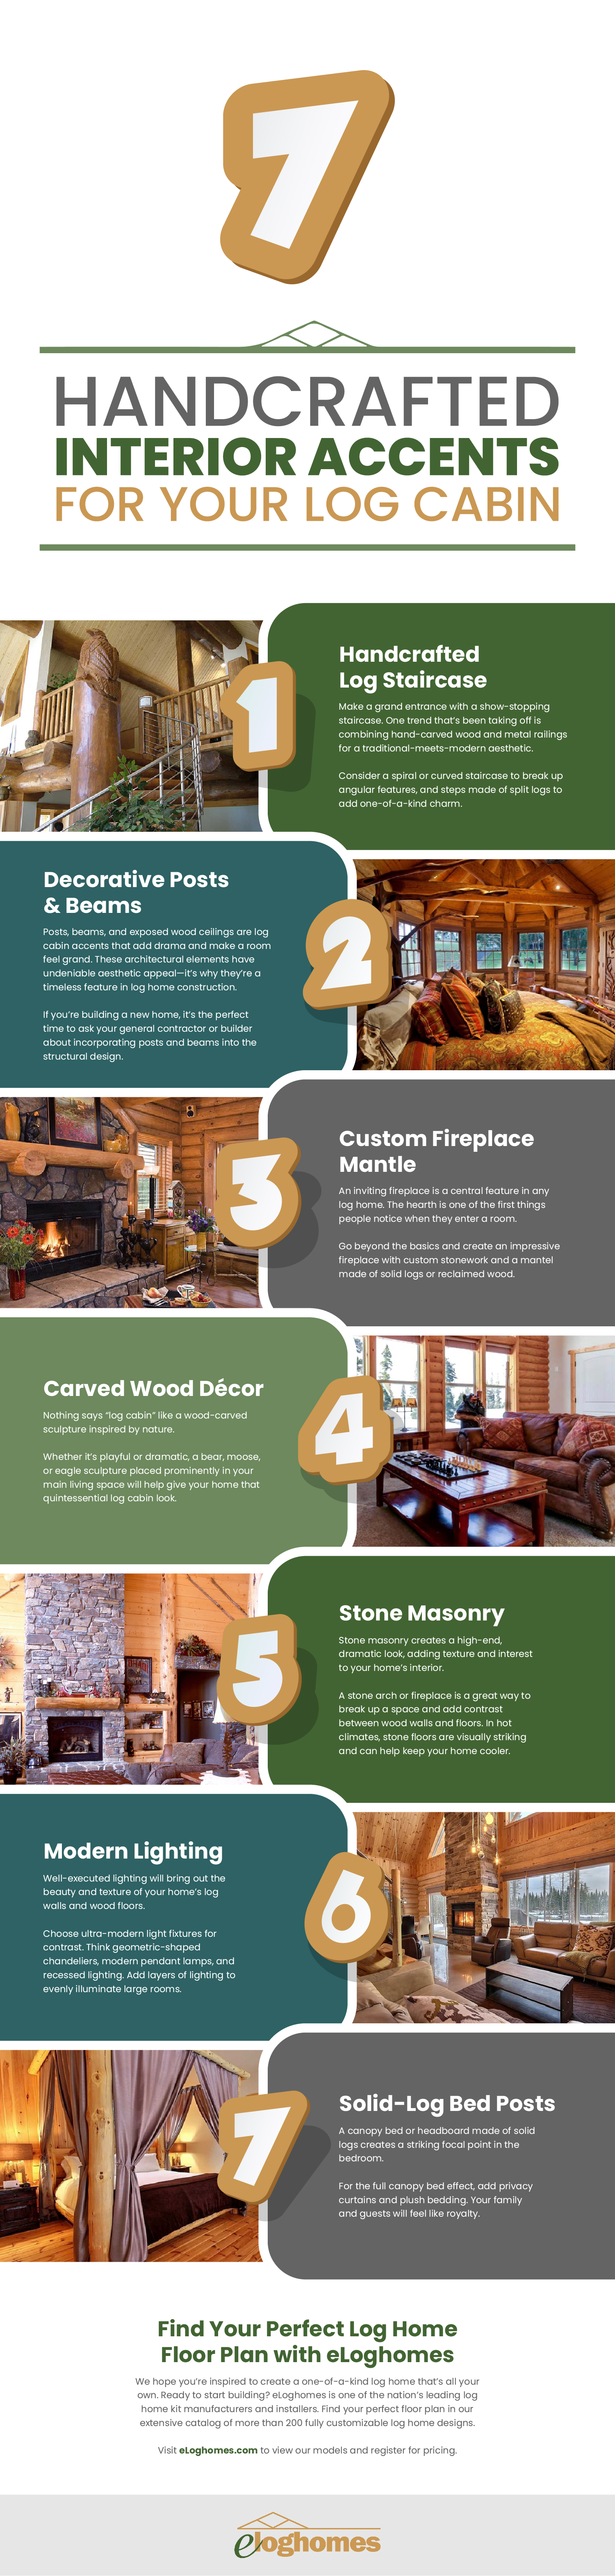 Handcrafted Interior Accents For Your Log Cabin